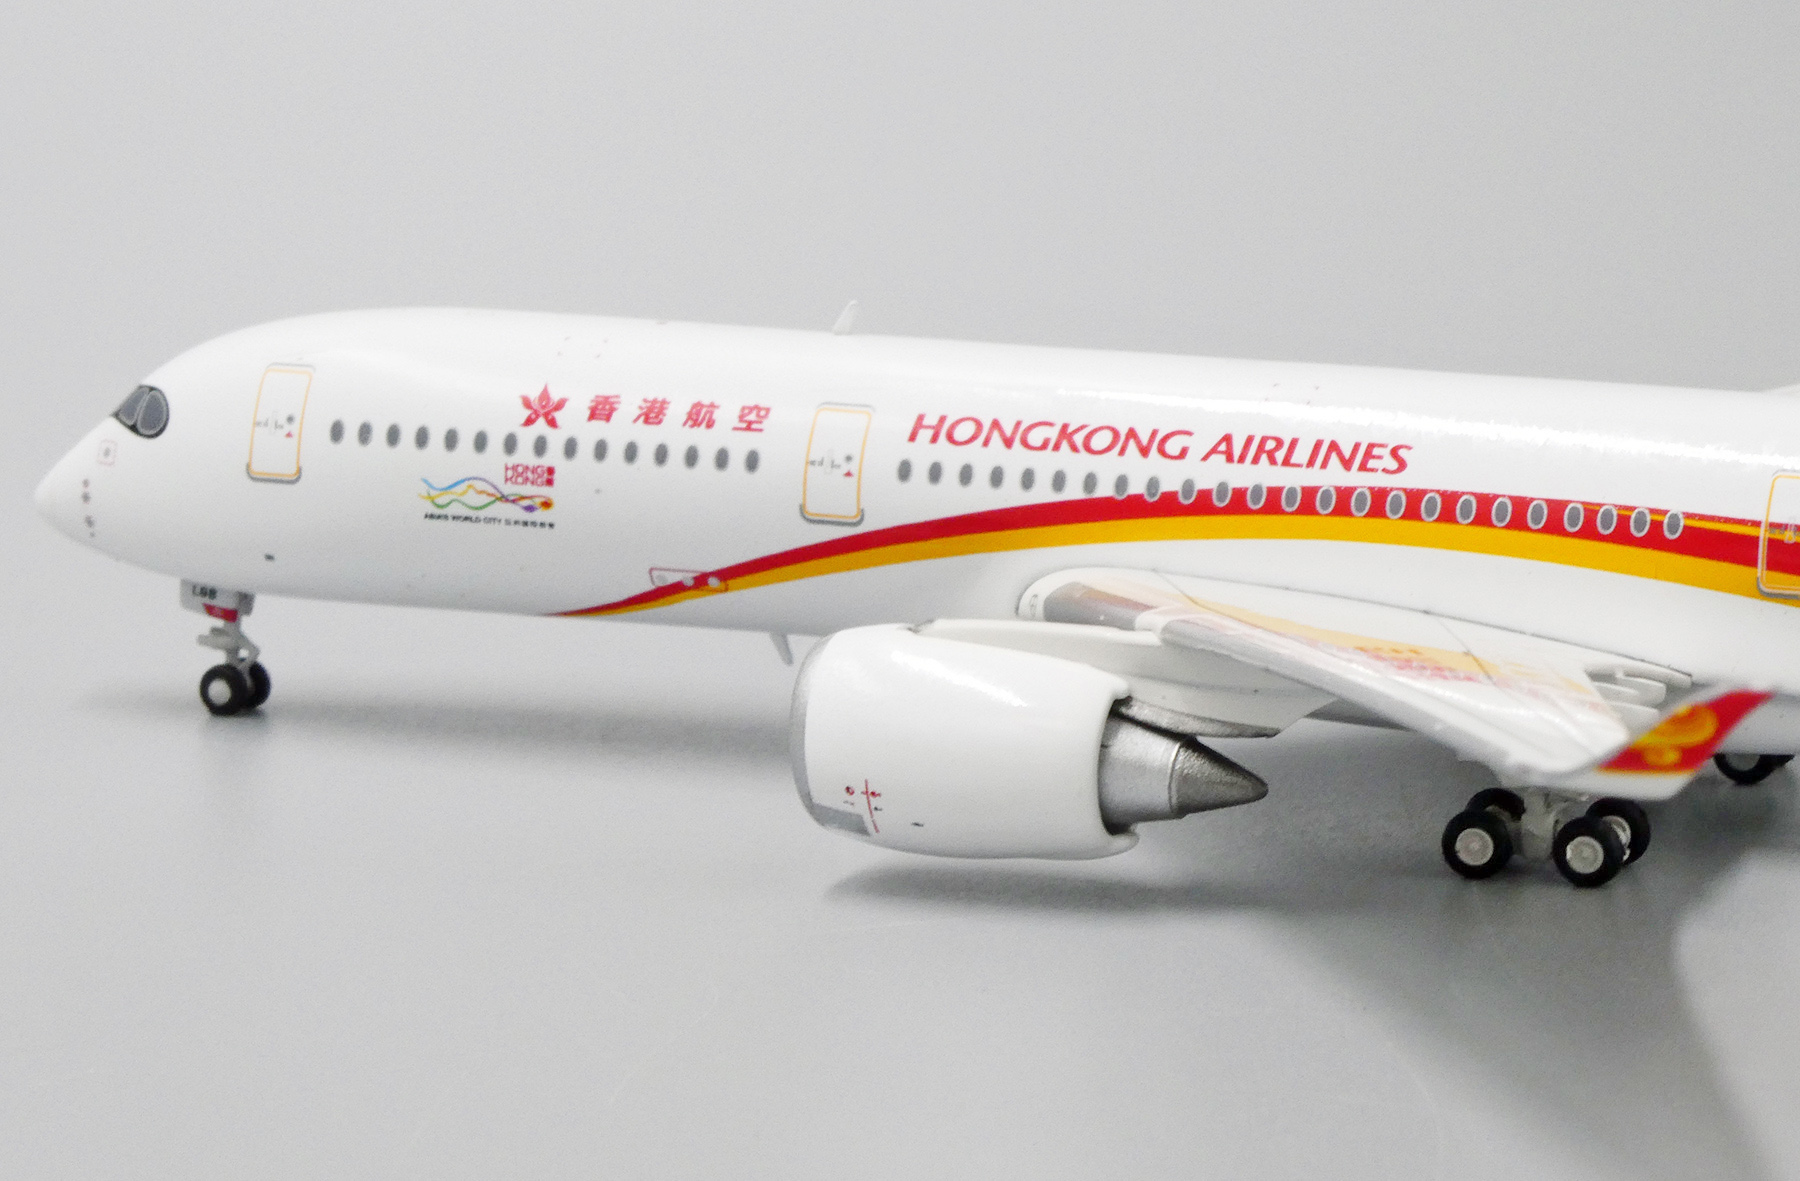 Details about   JCWINGS JCLH2151A 1/200 HONG KONG AIRLINES A350 FLAP DOWN B-LGE W/S LTD 85PCS 